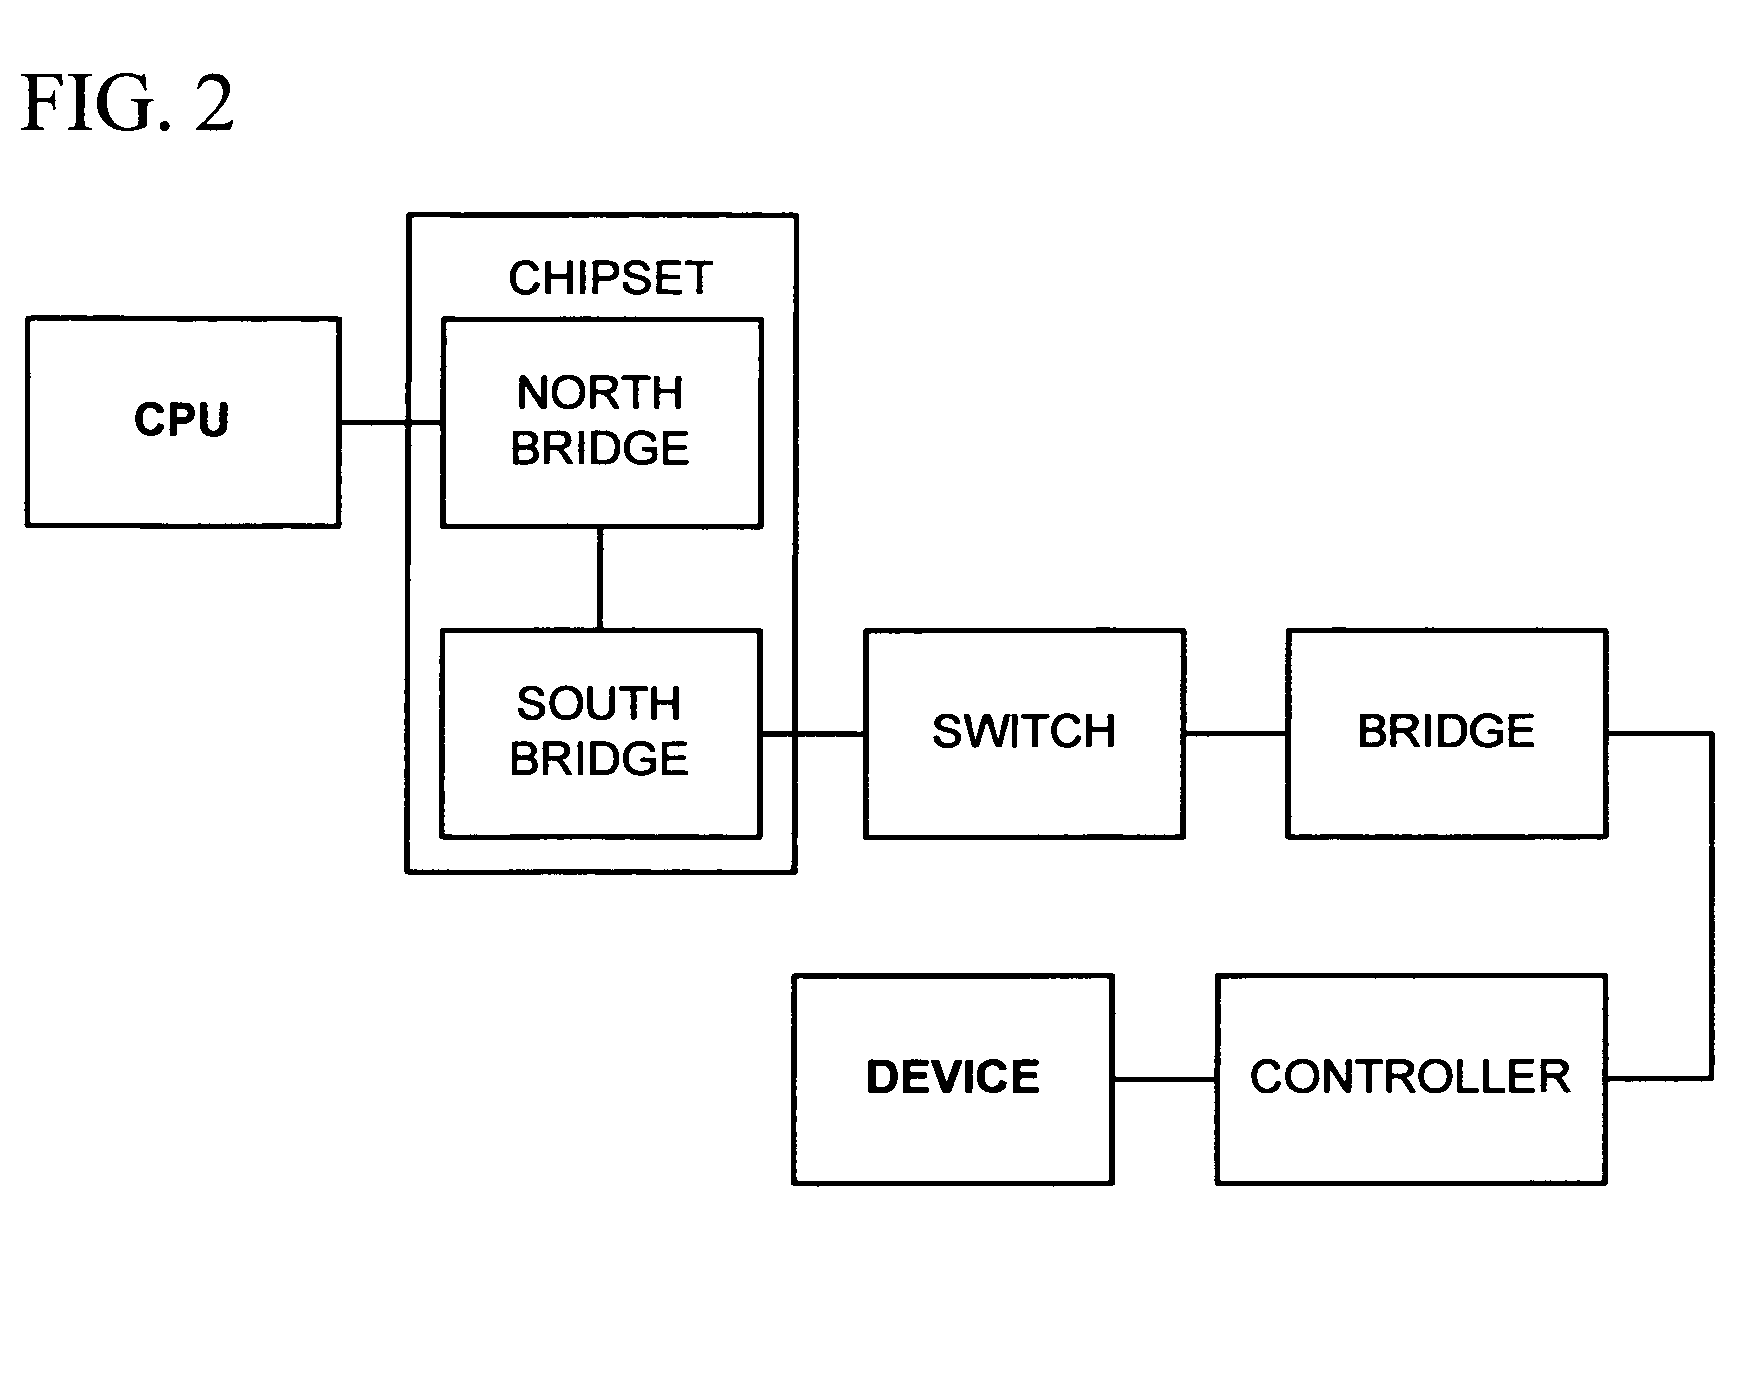 System data transfer optimization of extended computer systems